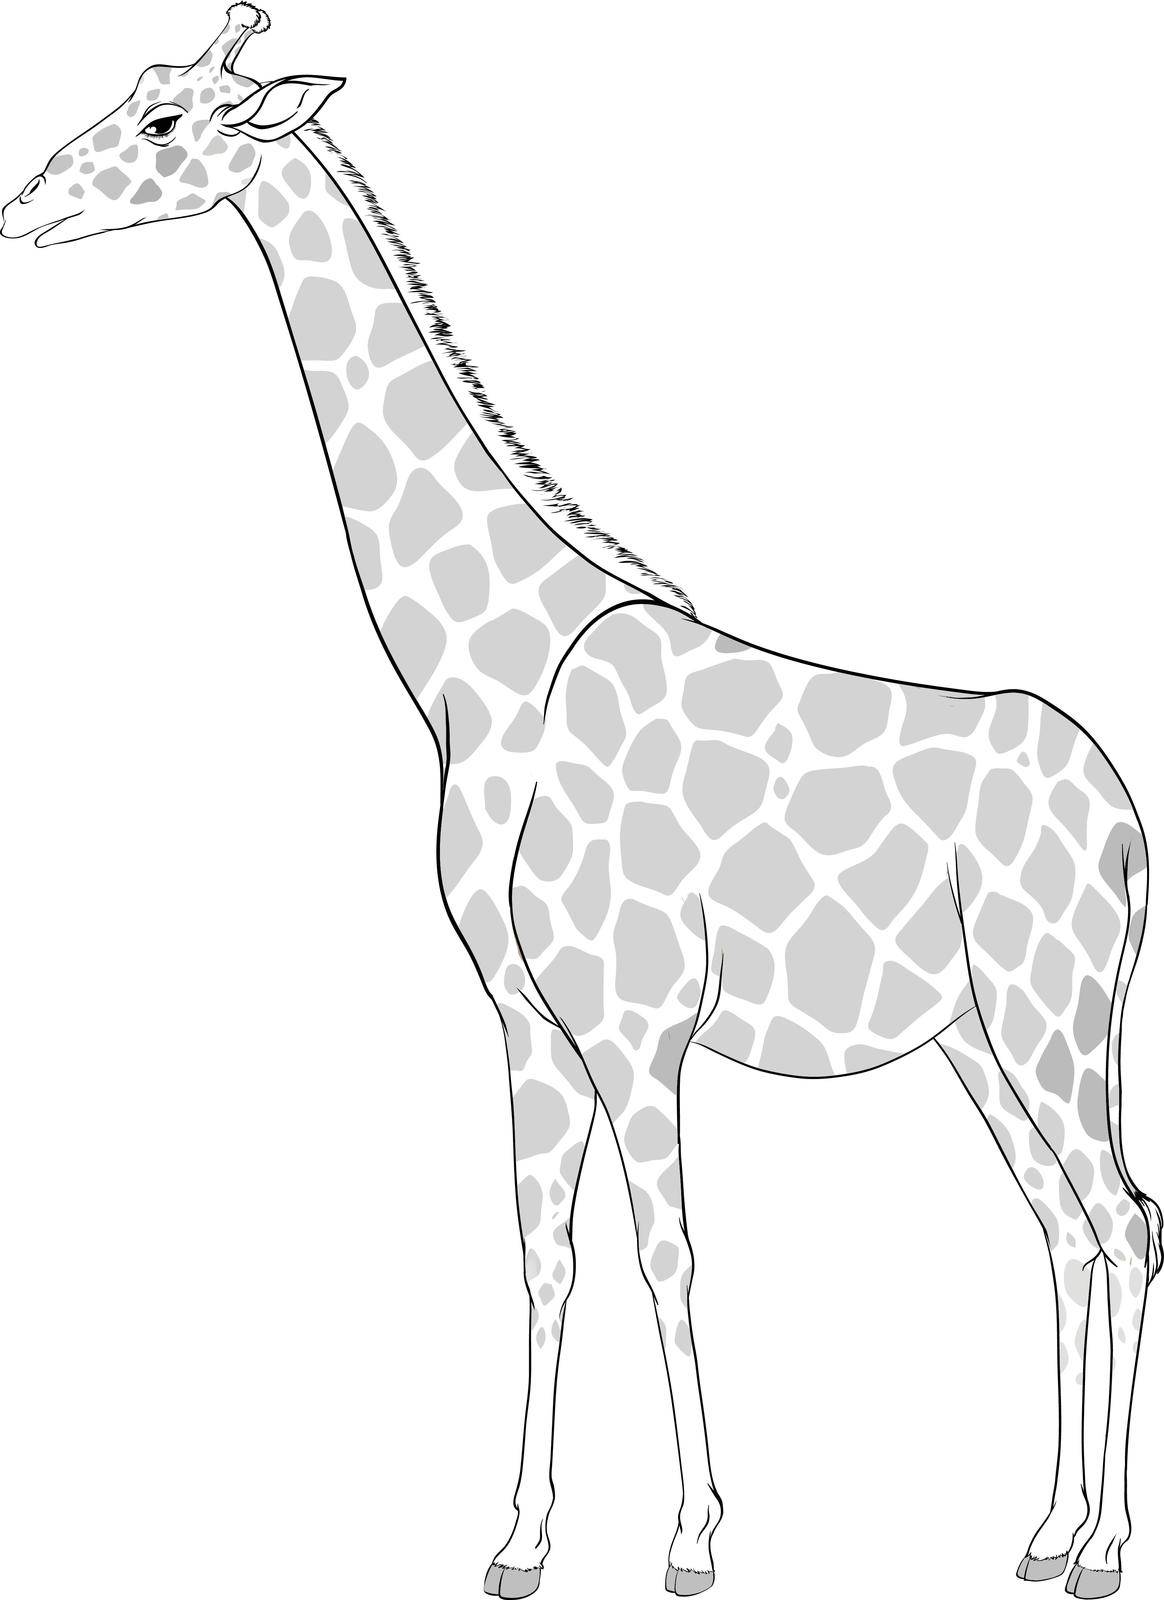 A sketch of a giraffe by iimages